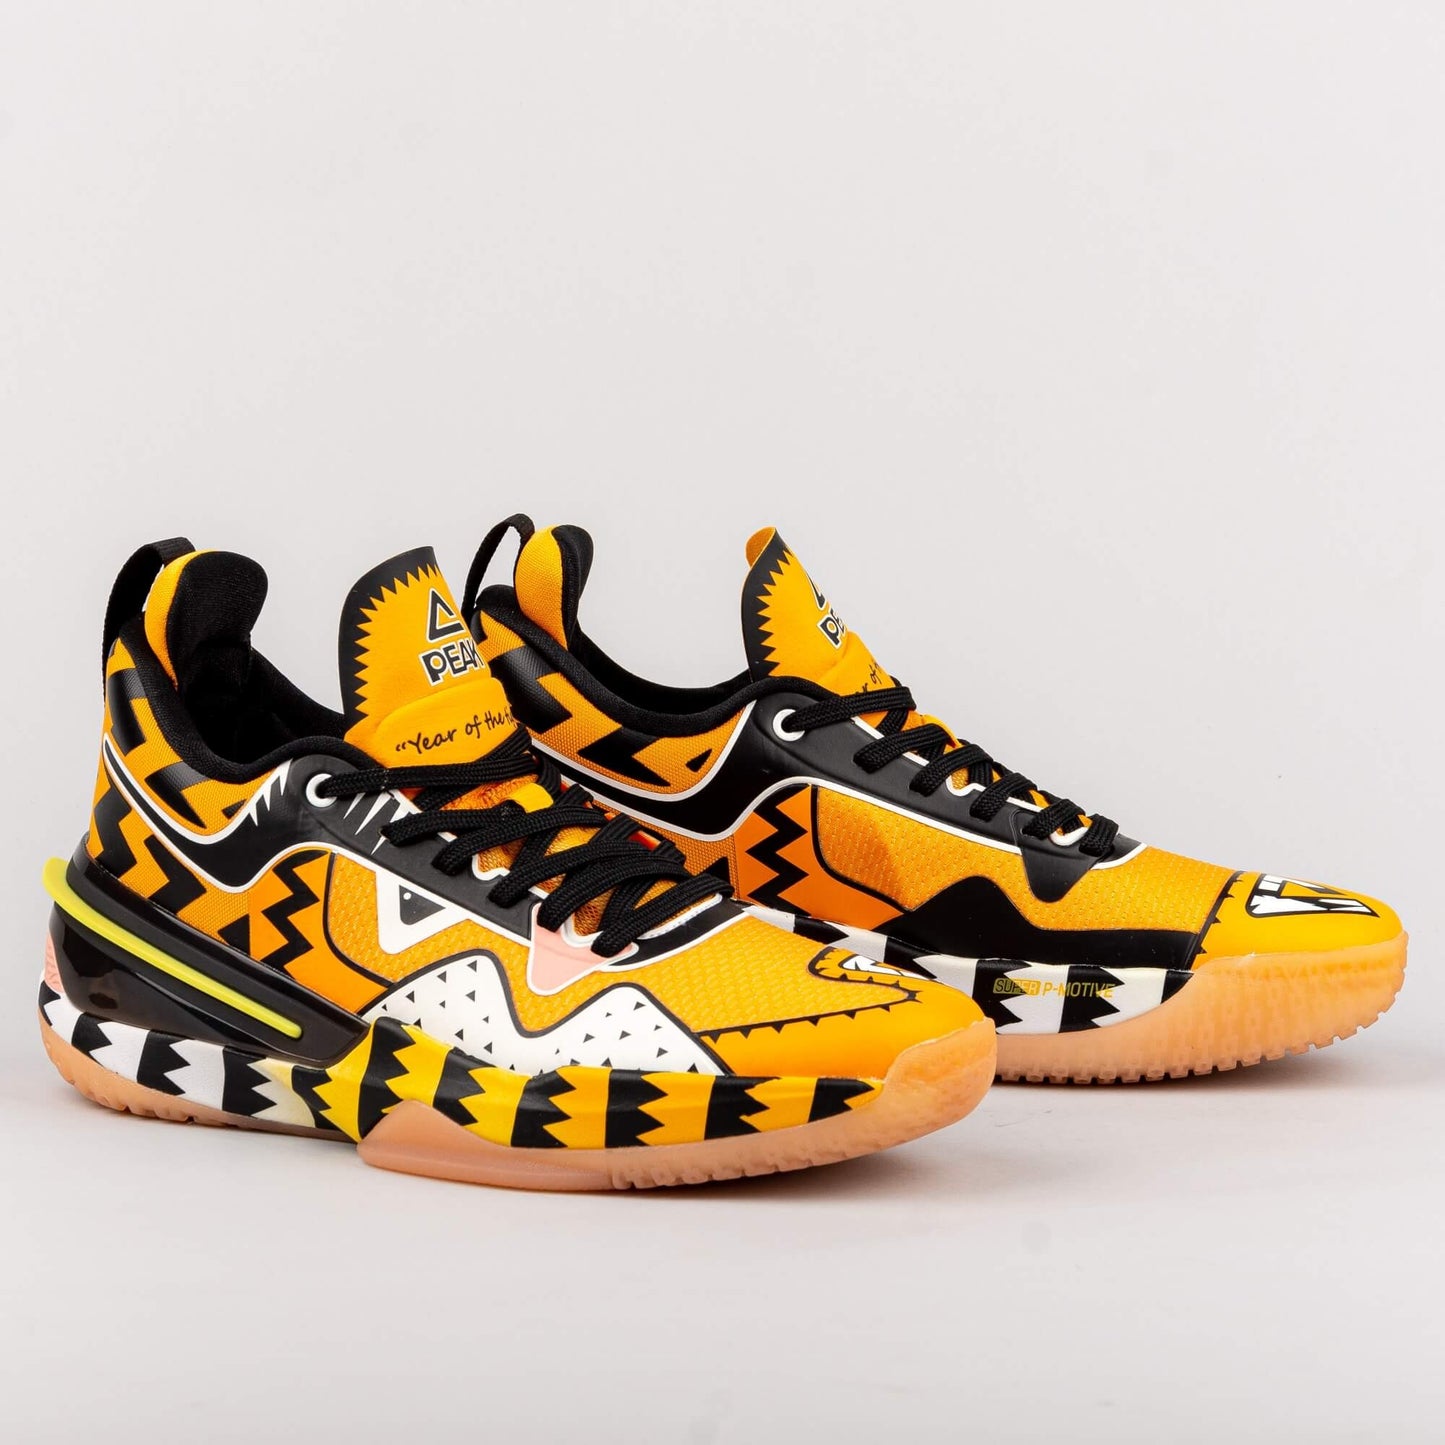 Peak Basketball Match Shoes Year Of The Tiger Limited Edition Flash 3 Mango Yellow